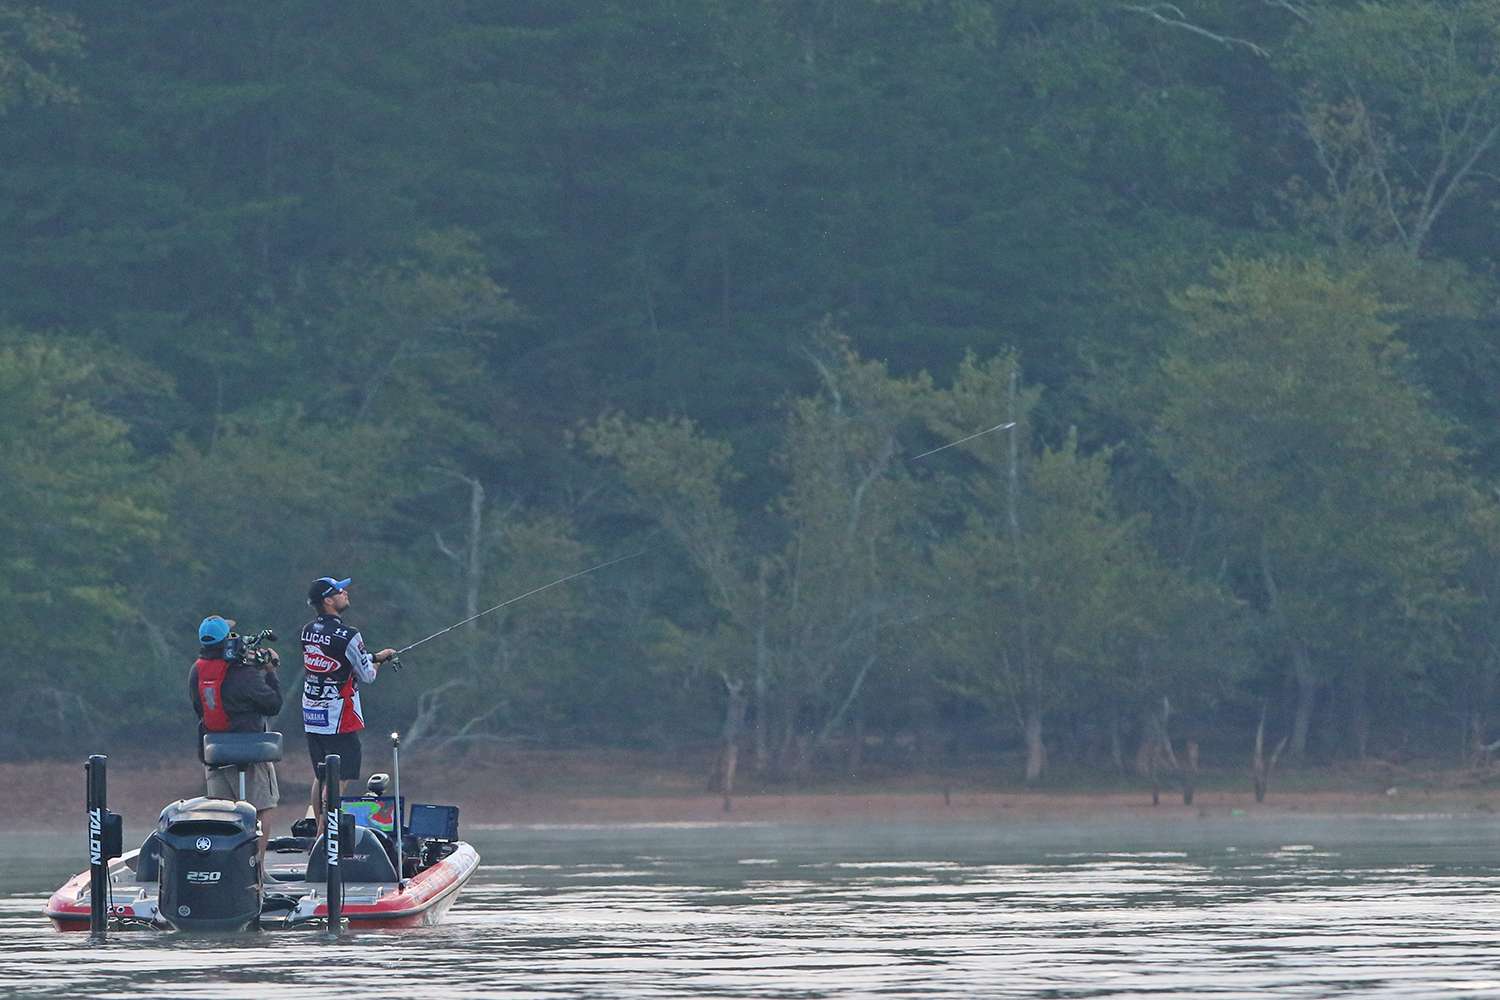 Justin Lucas needed a solid Sunday to secure the 2018 Toyota Bassmaster of the Angler title.